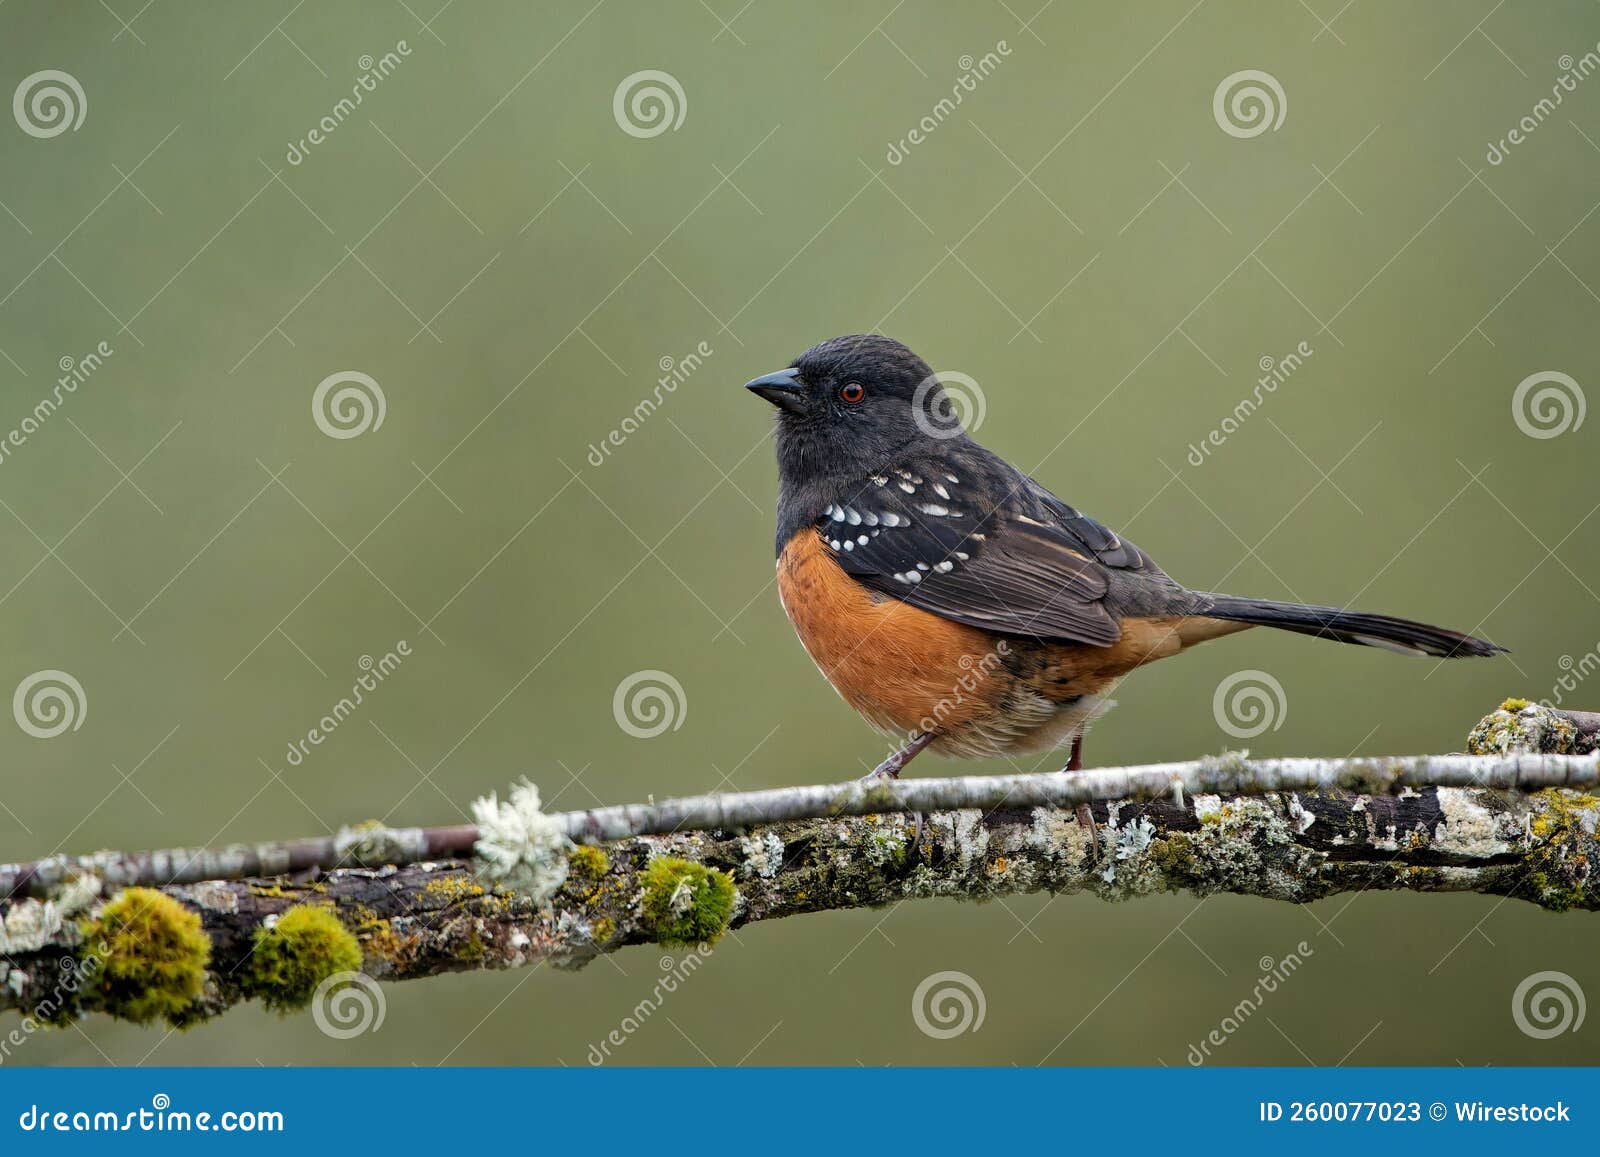 spotted towhee bird (pipilo maculatus) on a branch on blurred background